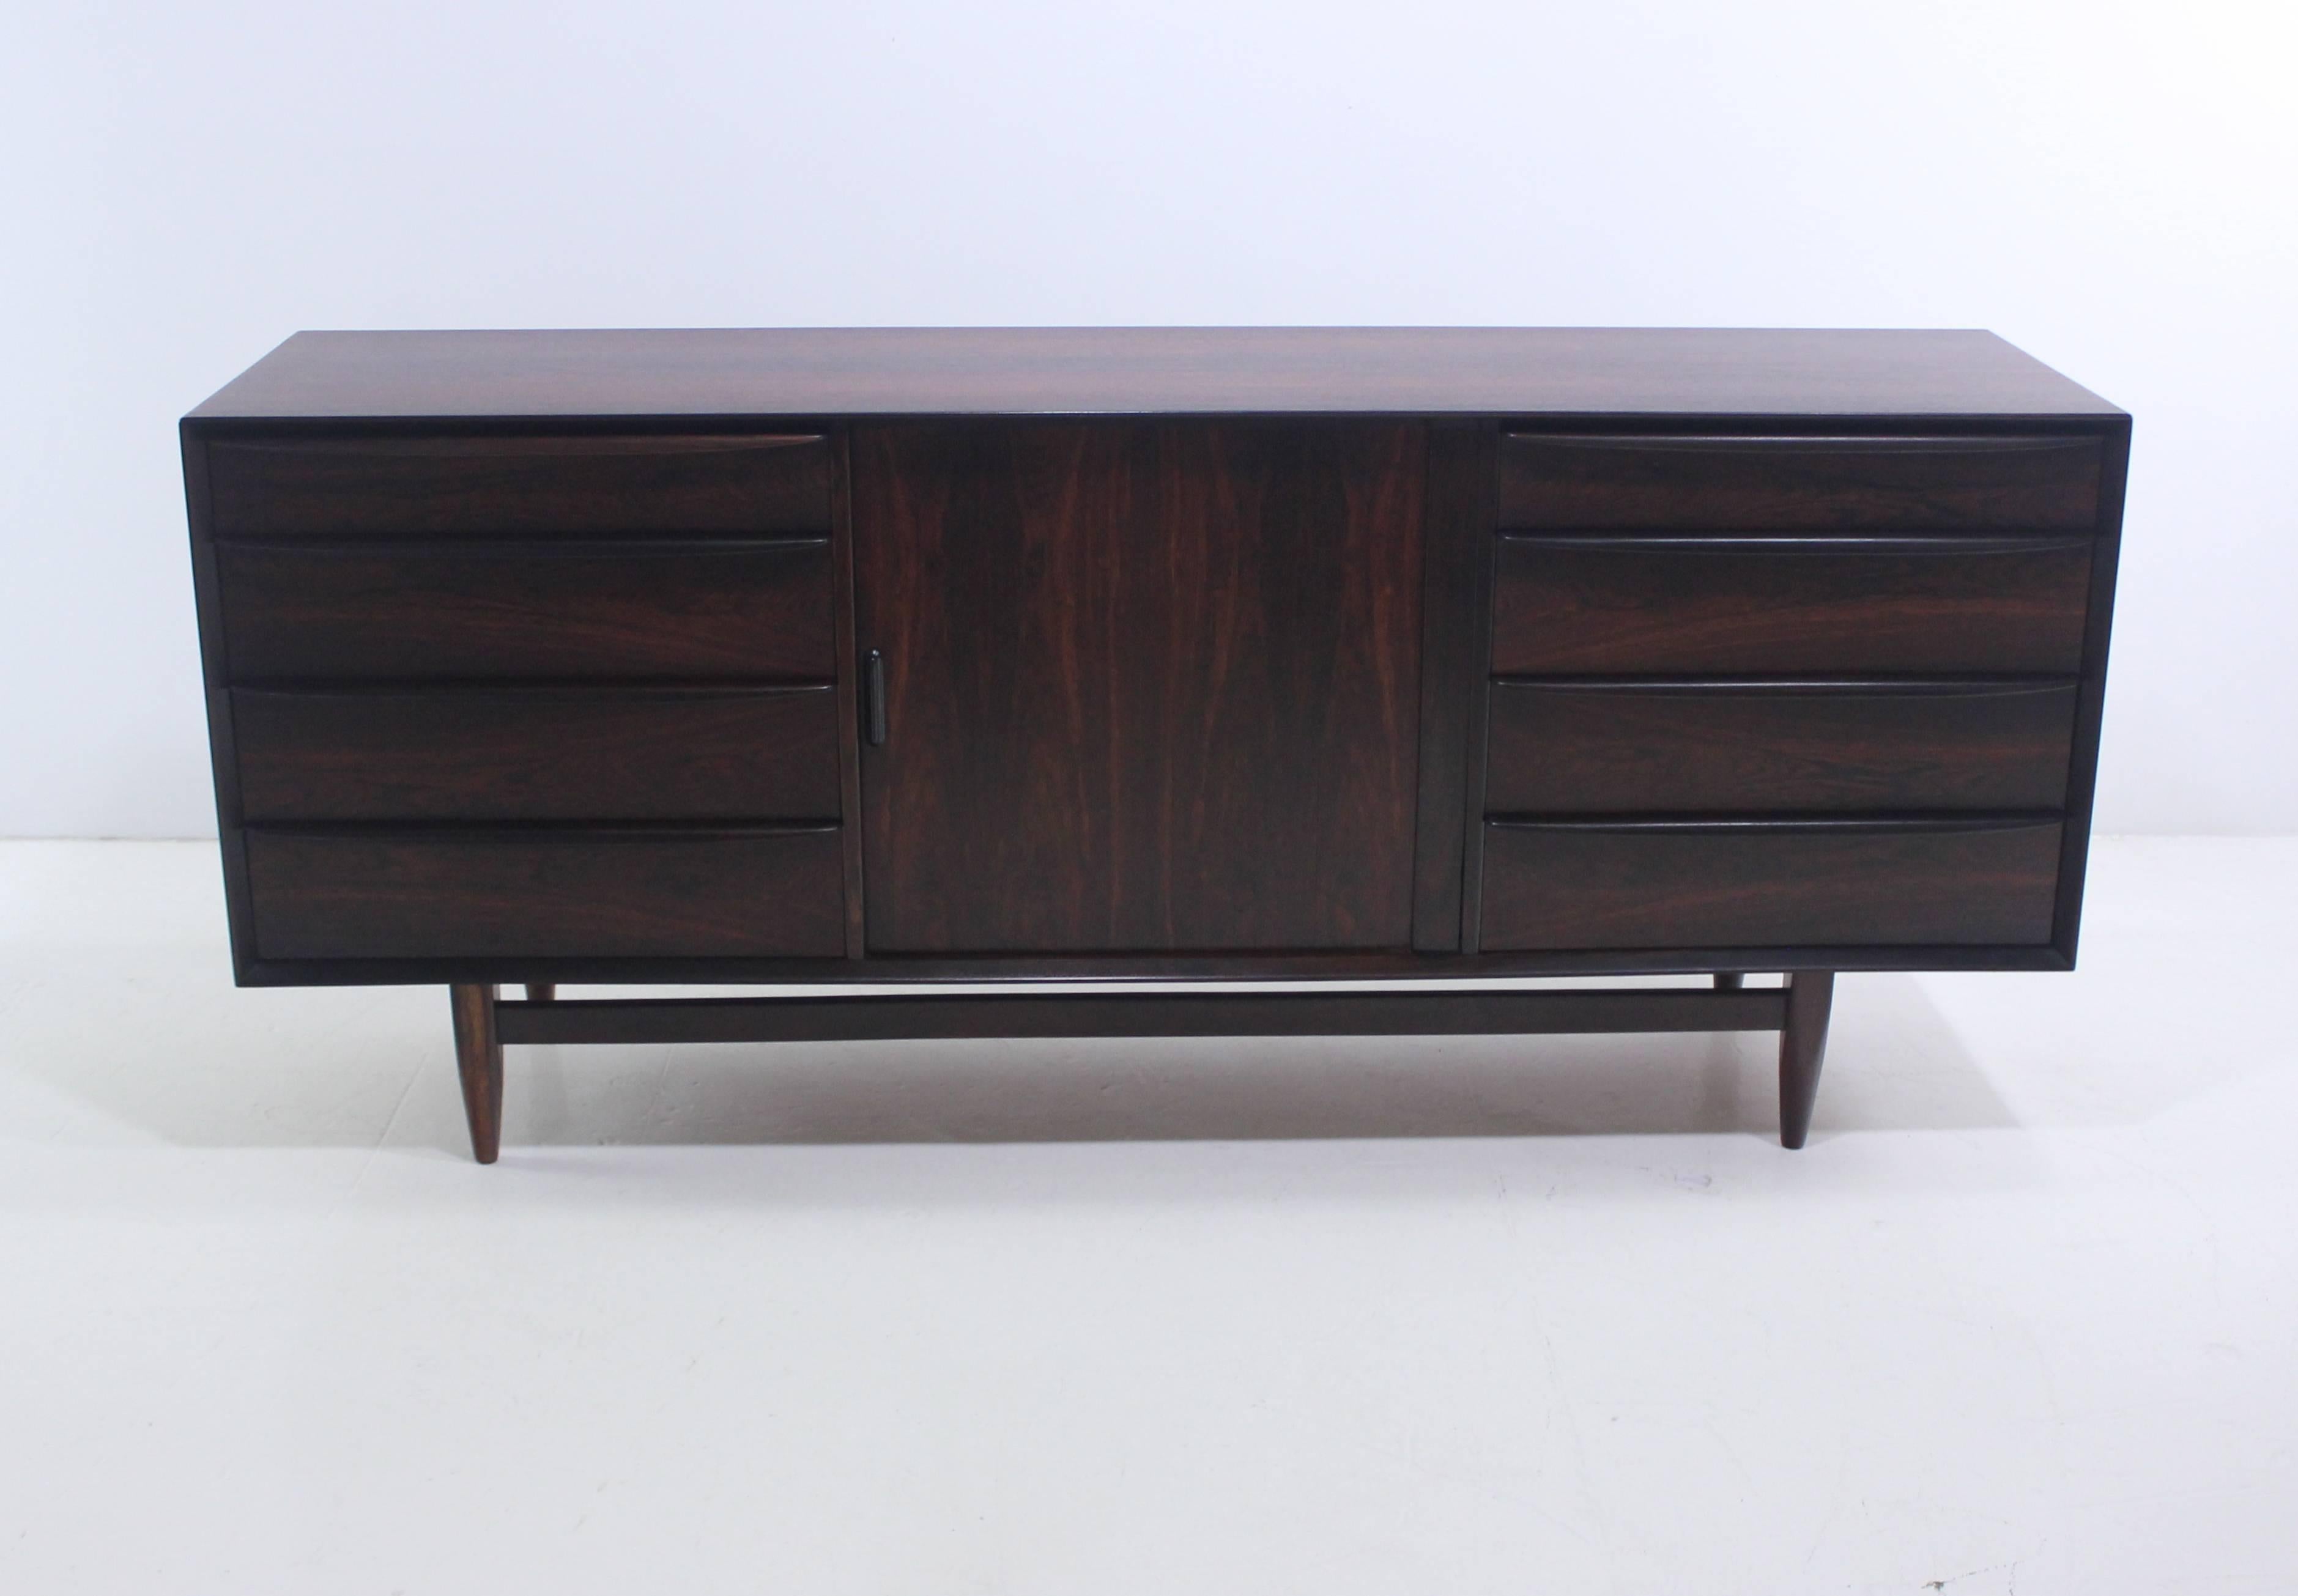 Danish modern credenza / dresser by Falster Møbelfabrik.
Deeply grained rosewood with birch interior.
Generous storage capacity, maximum functionality.
Tambour doors in middle glide open to four drawers.
Four drawers on each end.
Professionally